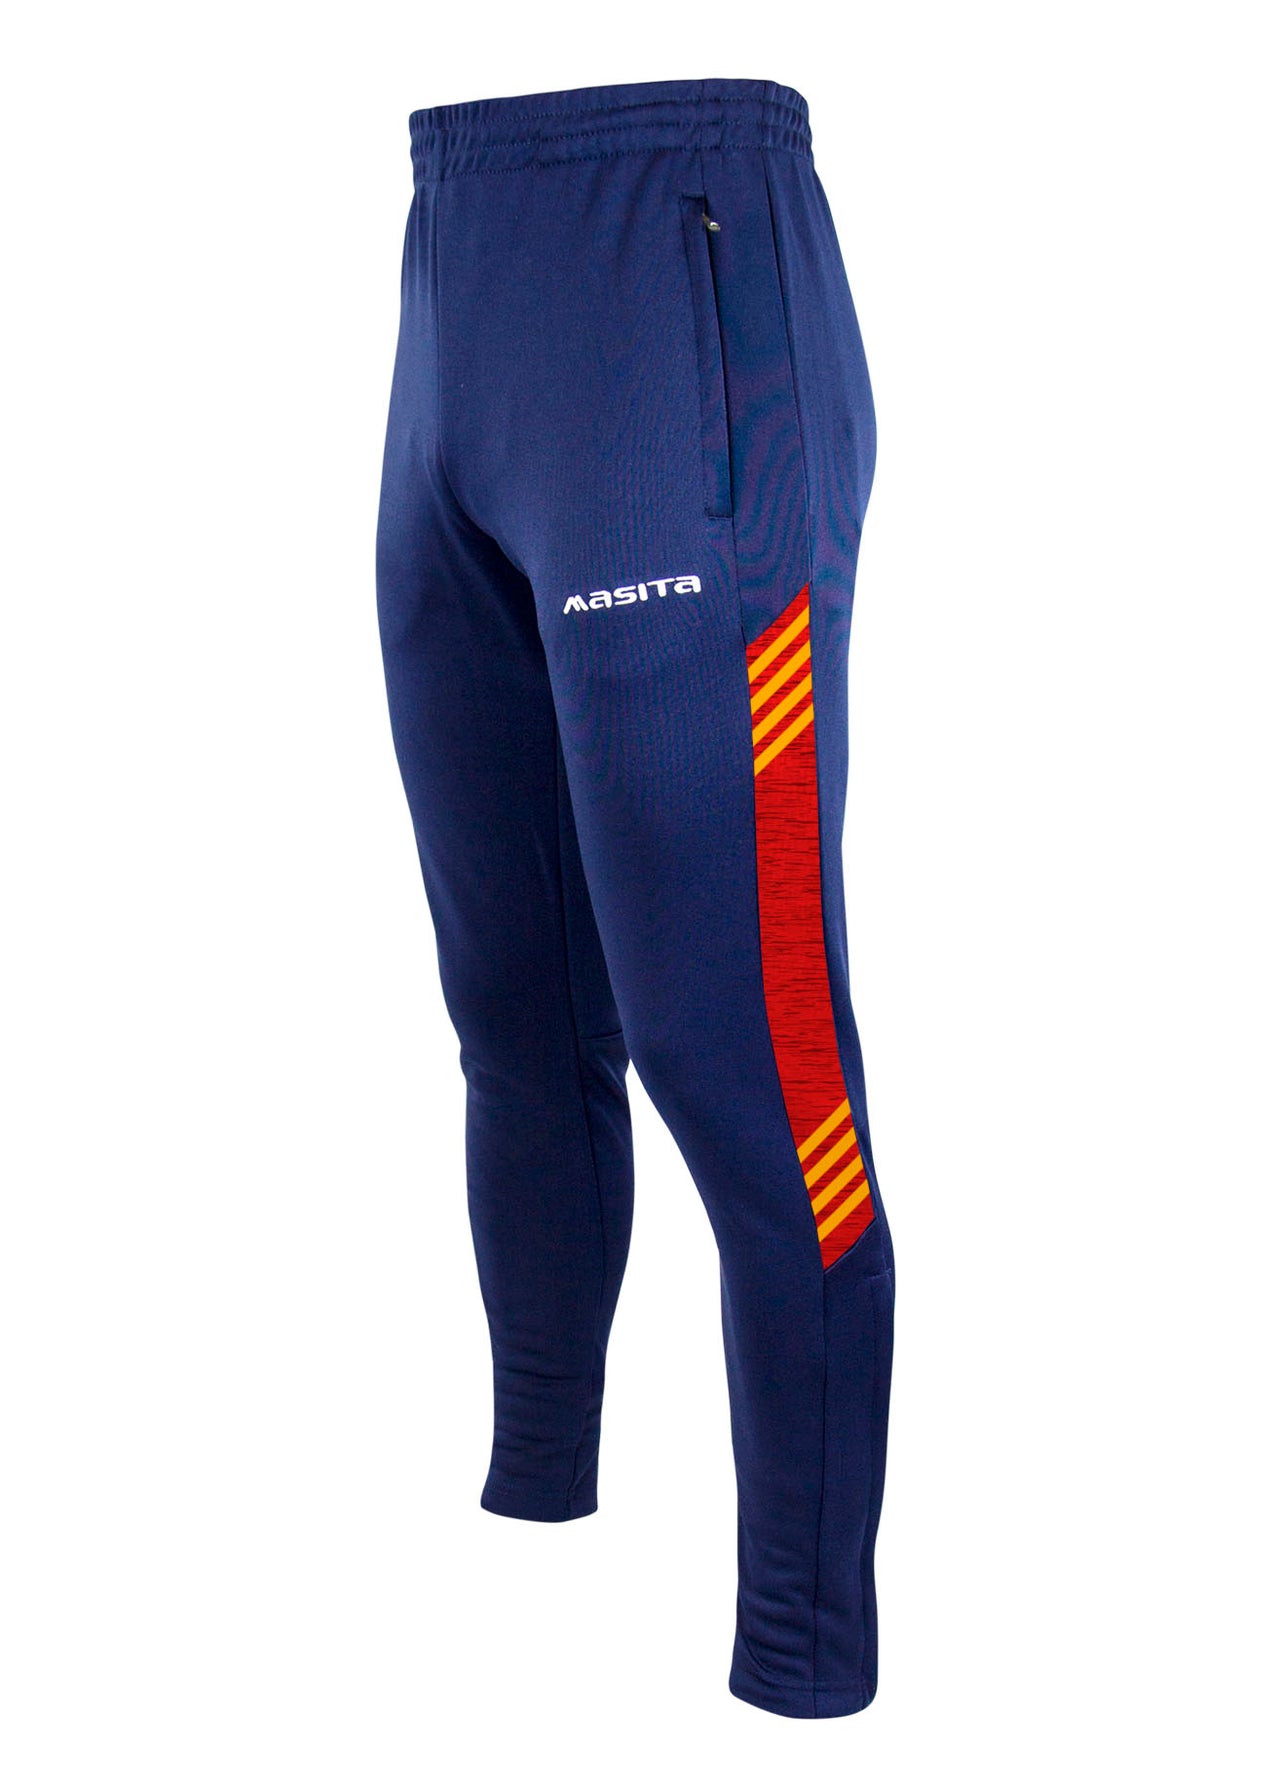 Hydro Skinny Bottoms Navy/Red/Amber Adult